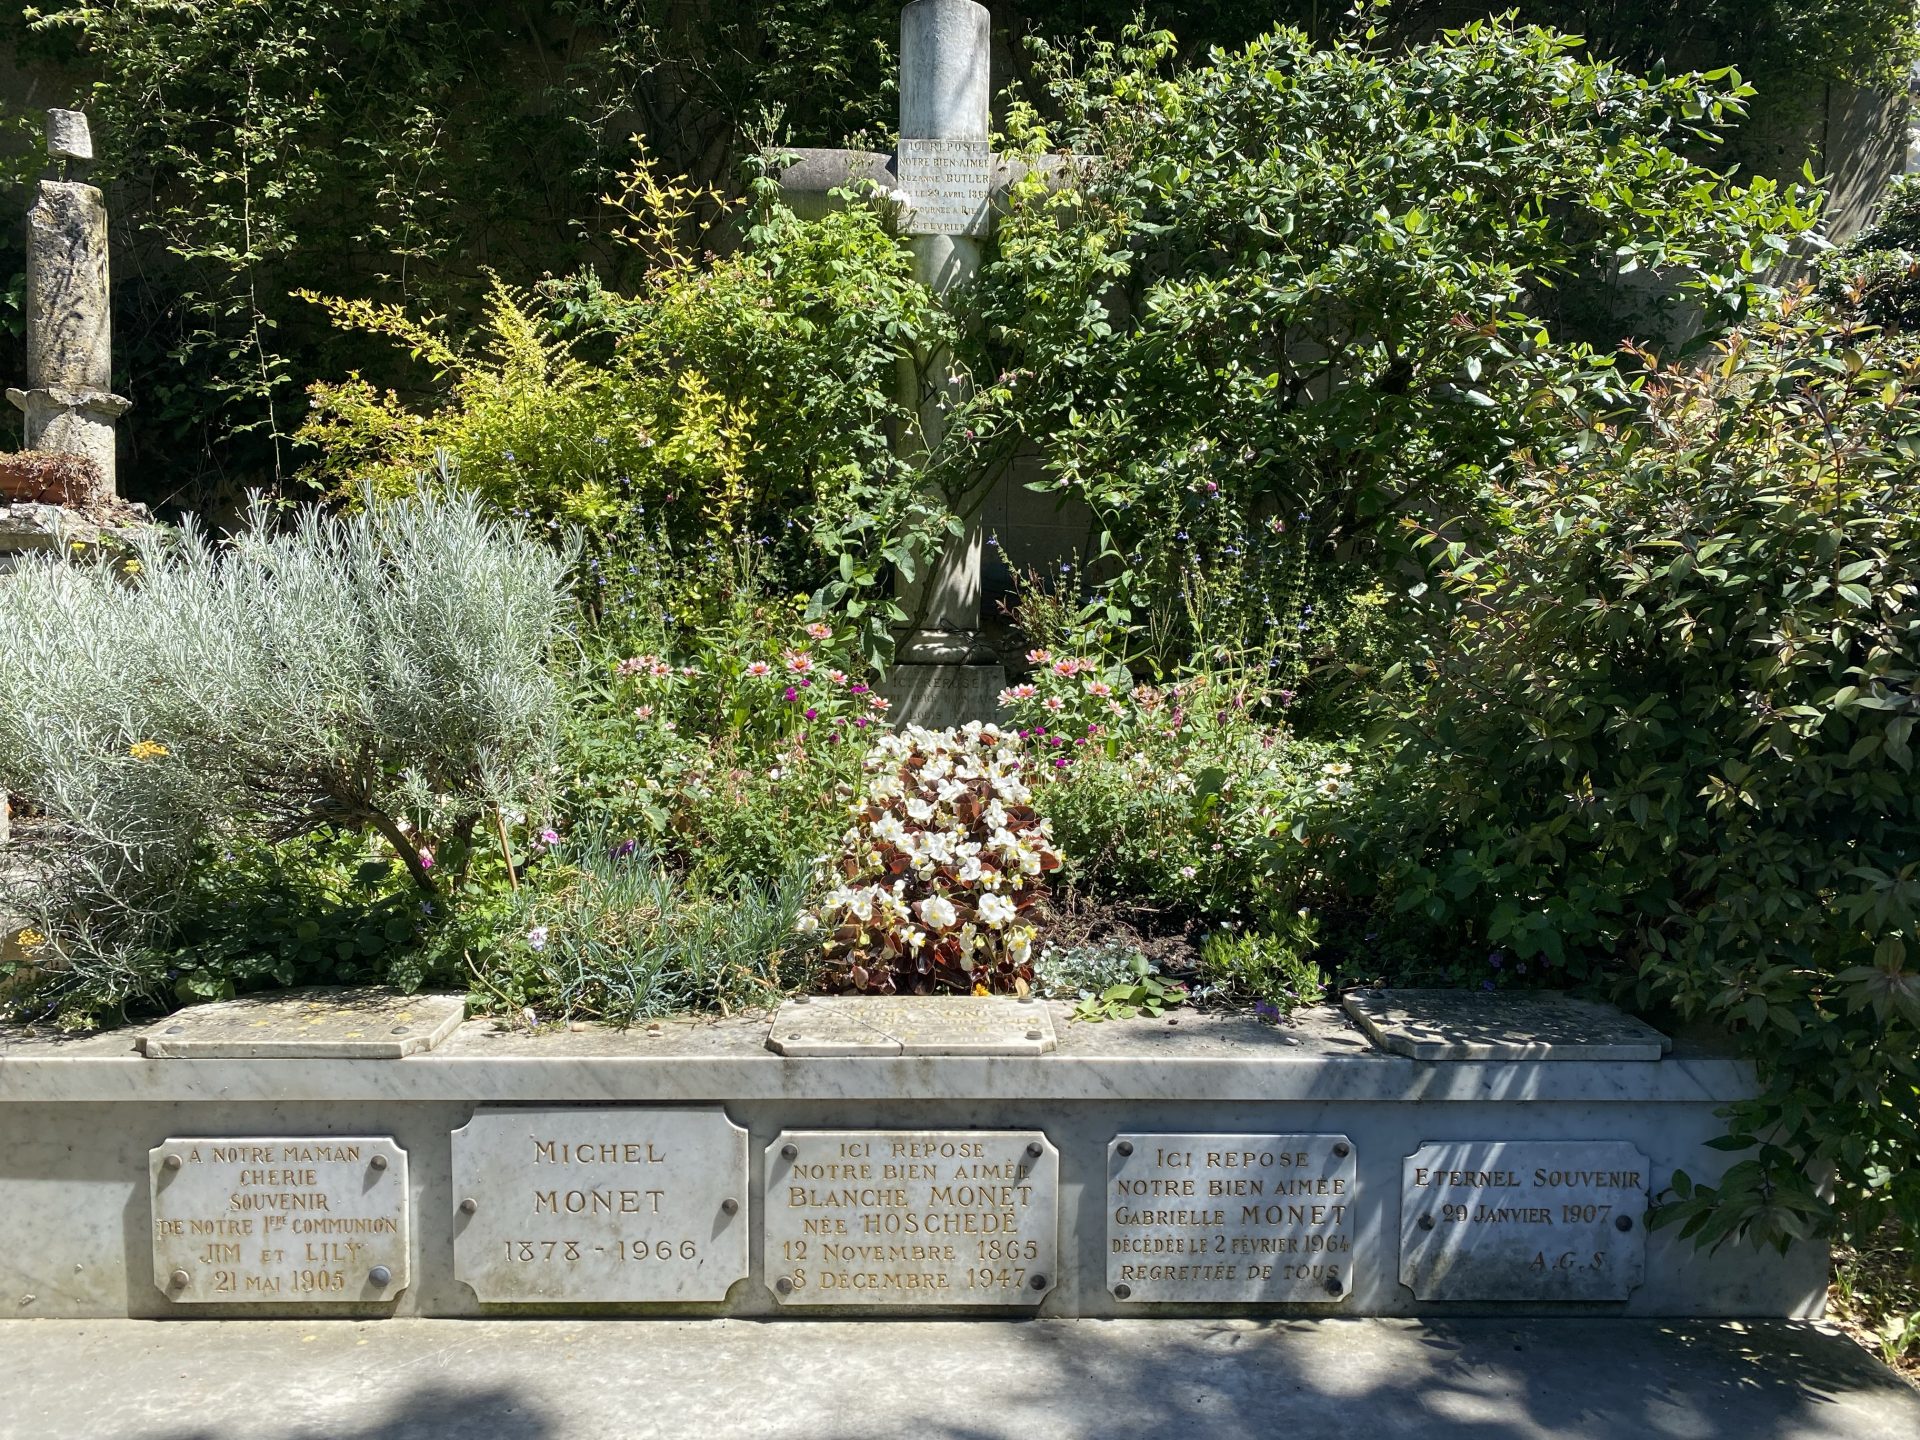 gravesite of Monet at Giverny